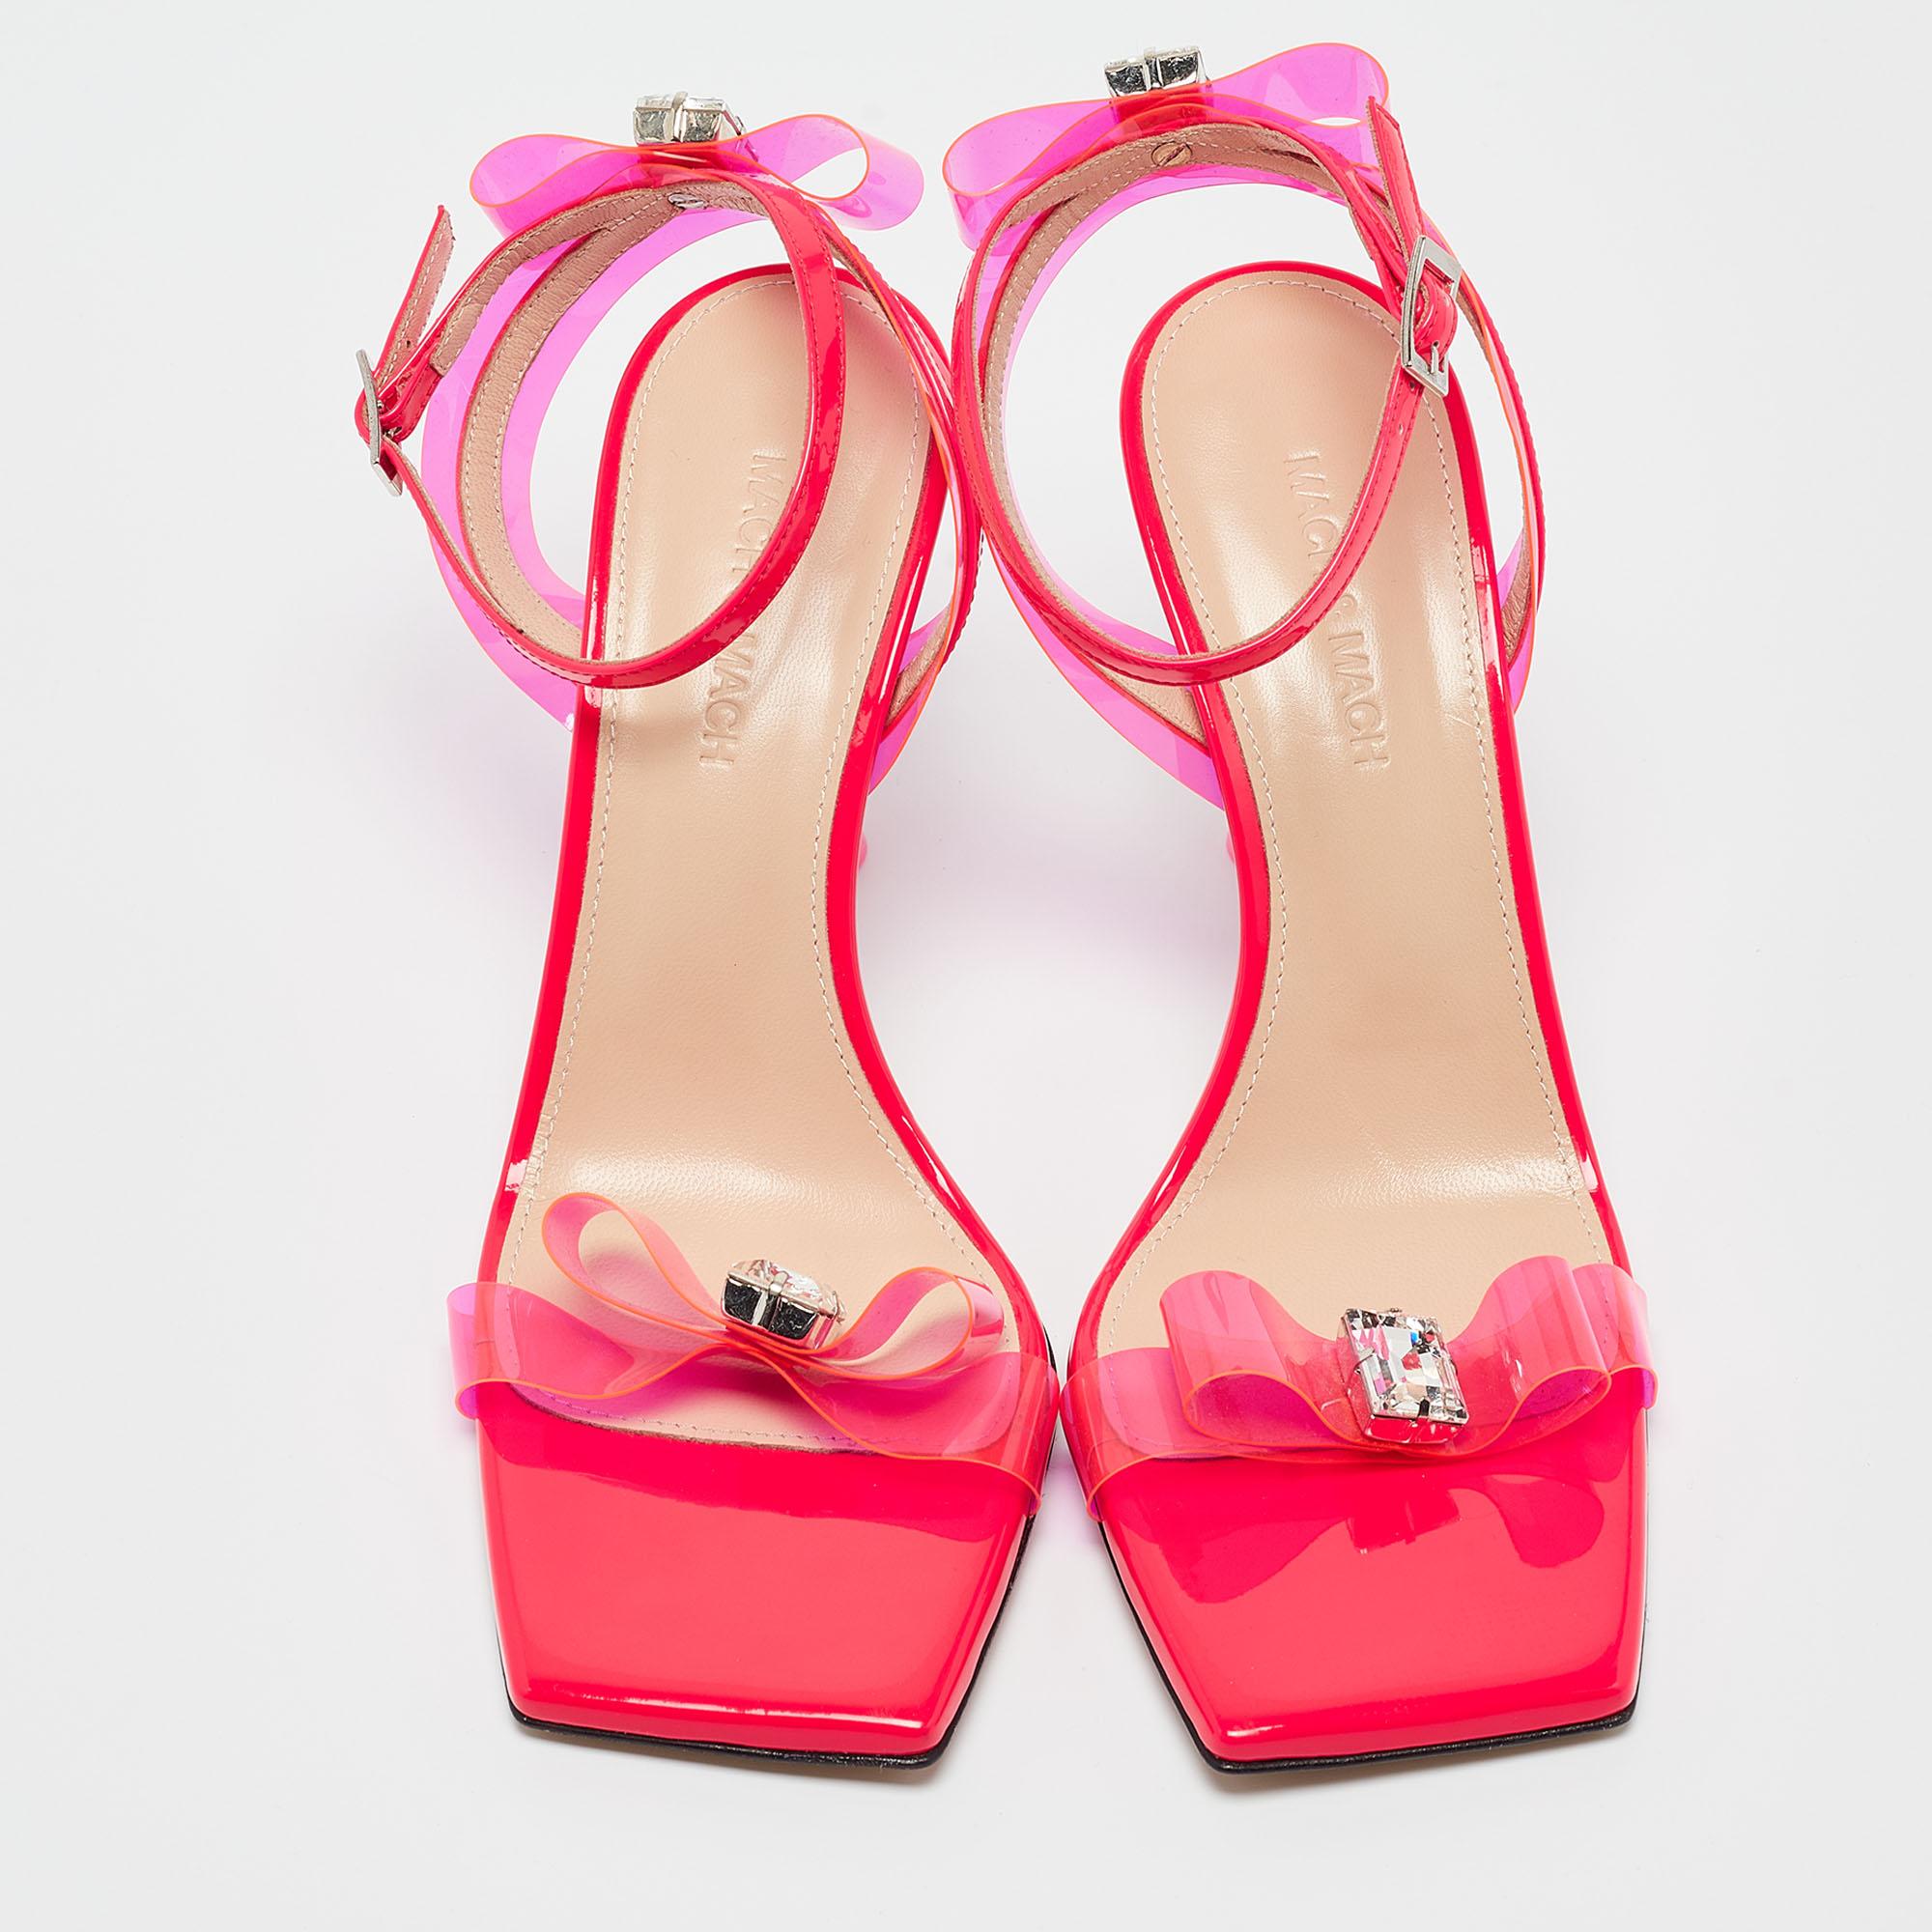 Slip into the epitome of playful luxury with Mach & Mach's sandals. Crafted with meticulous attention to detail, these sandals feature a charming French bow accent, blending the allure of patent leather with the whimsical appeal of translucent PVC